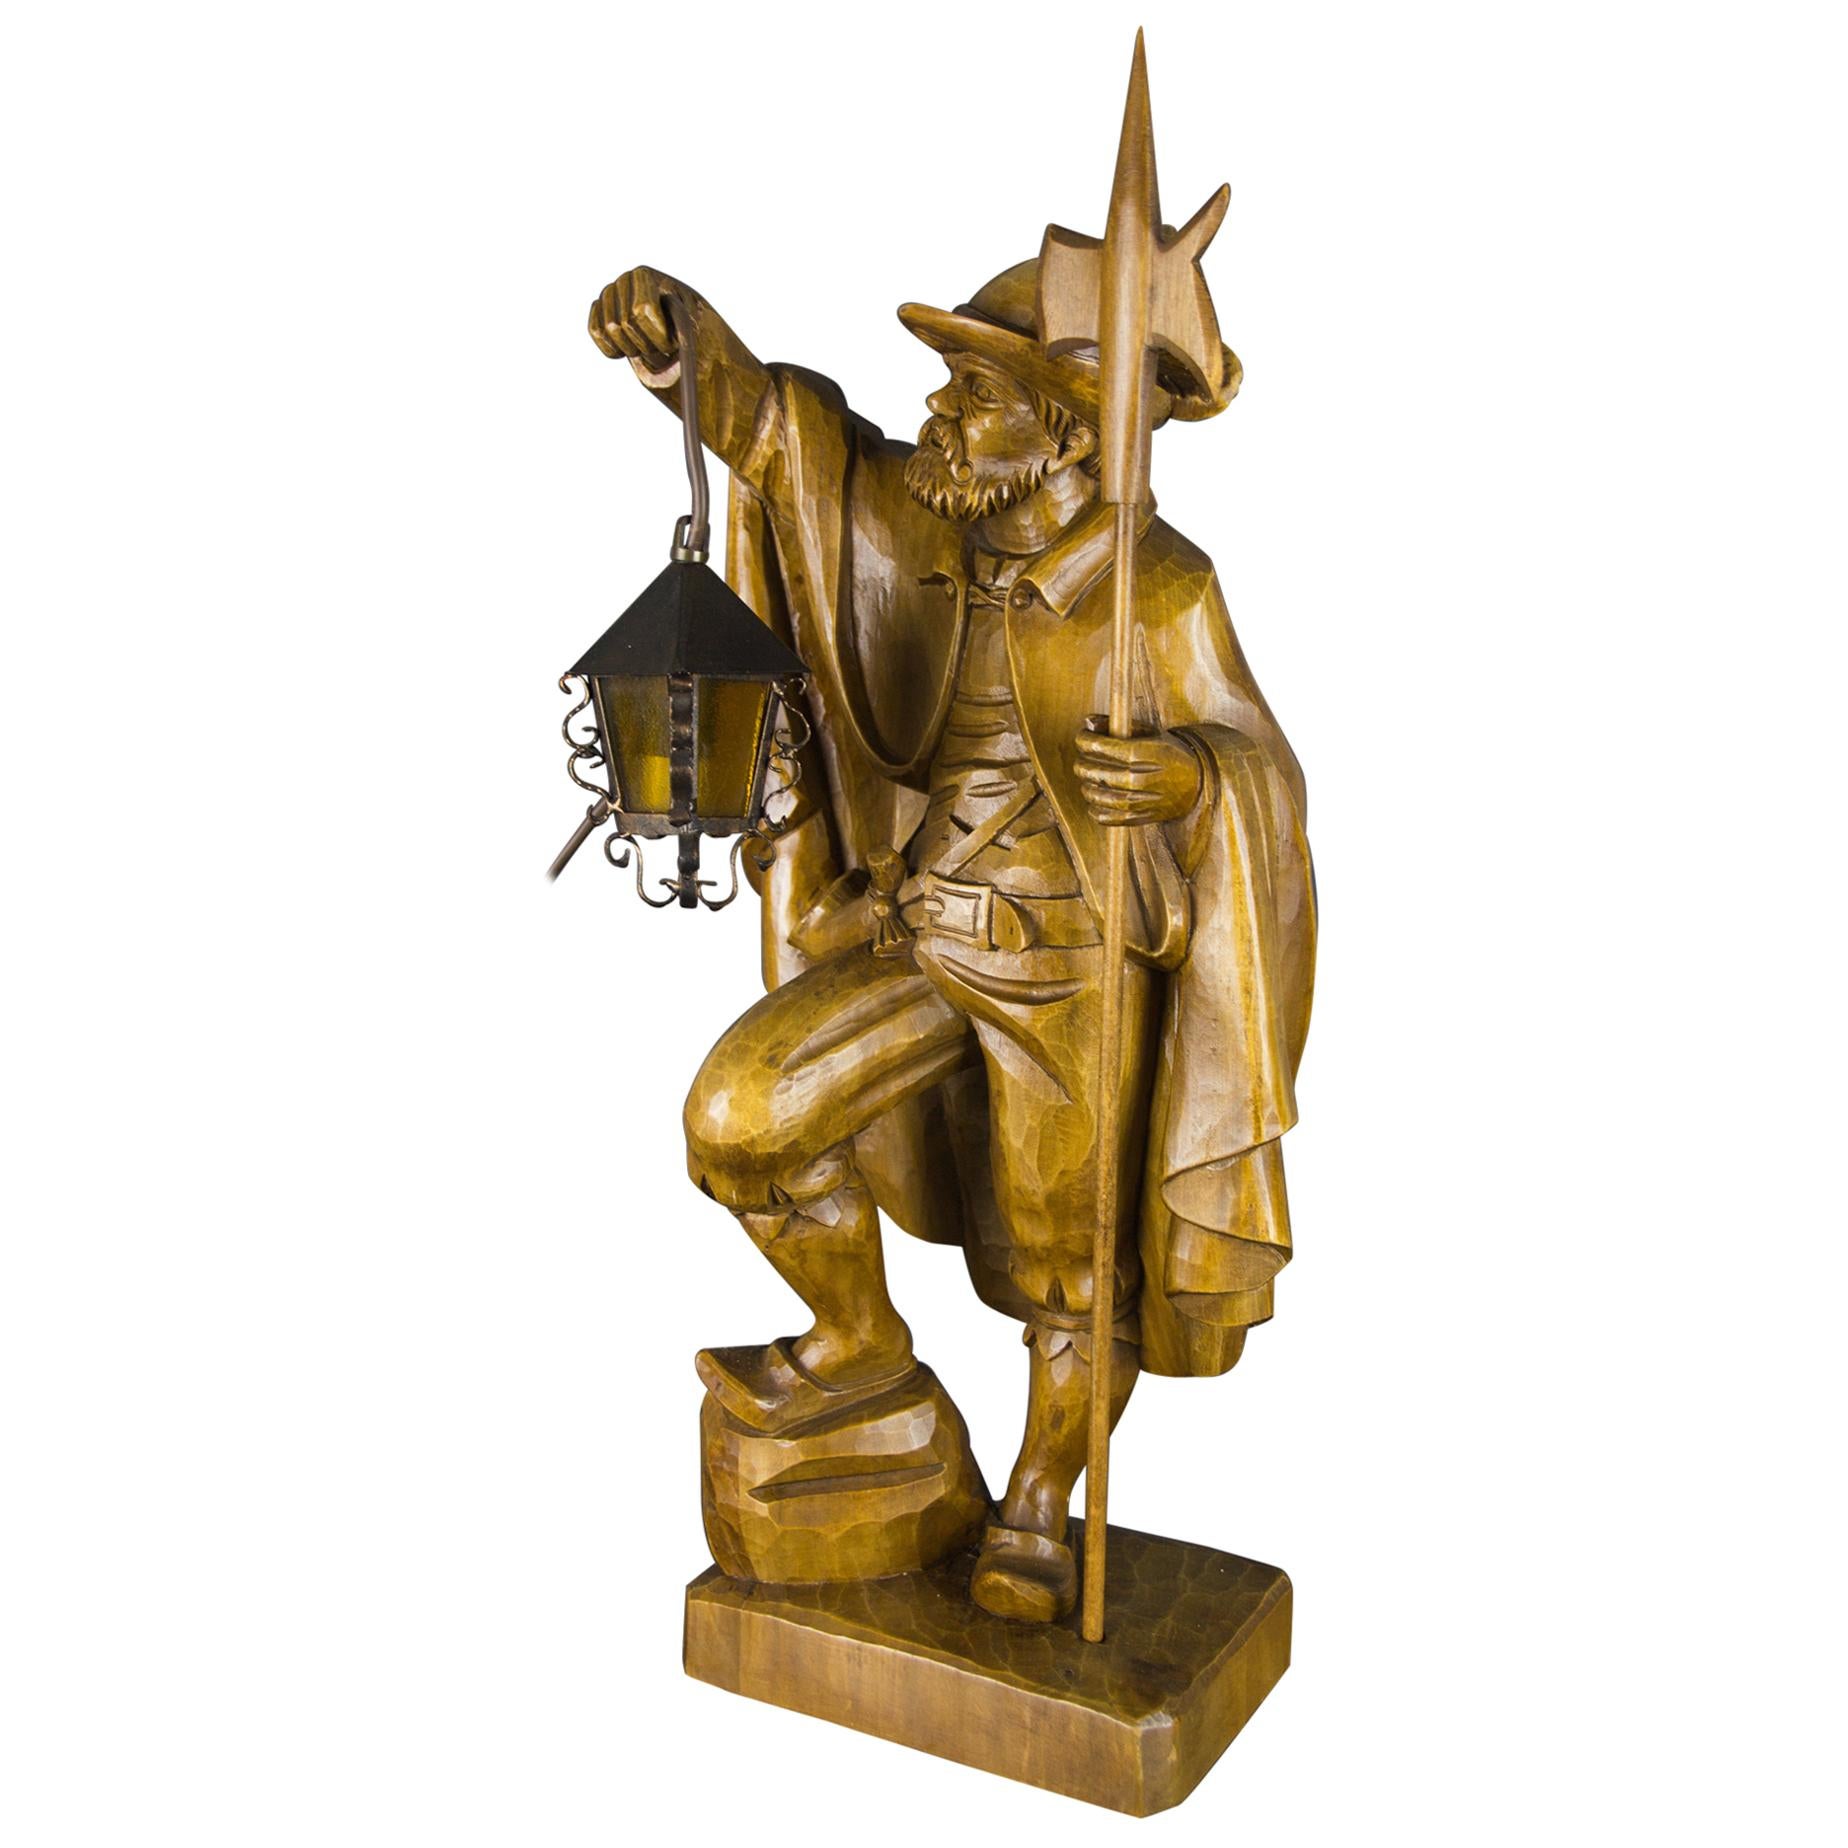 German Hand Carved Wooden Figurative Sculpture Lamp Night Watchman with Lantern